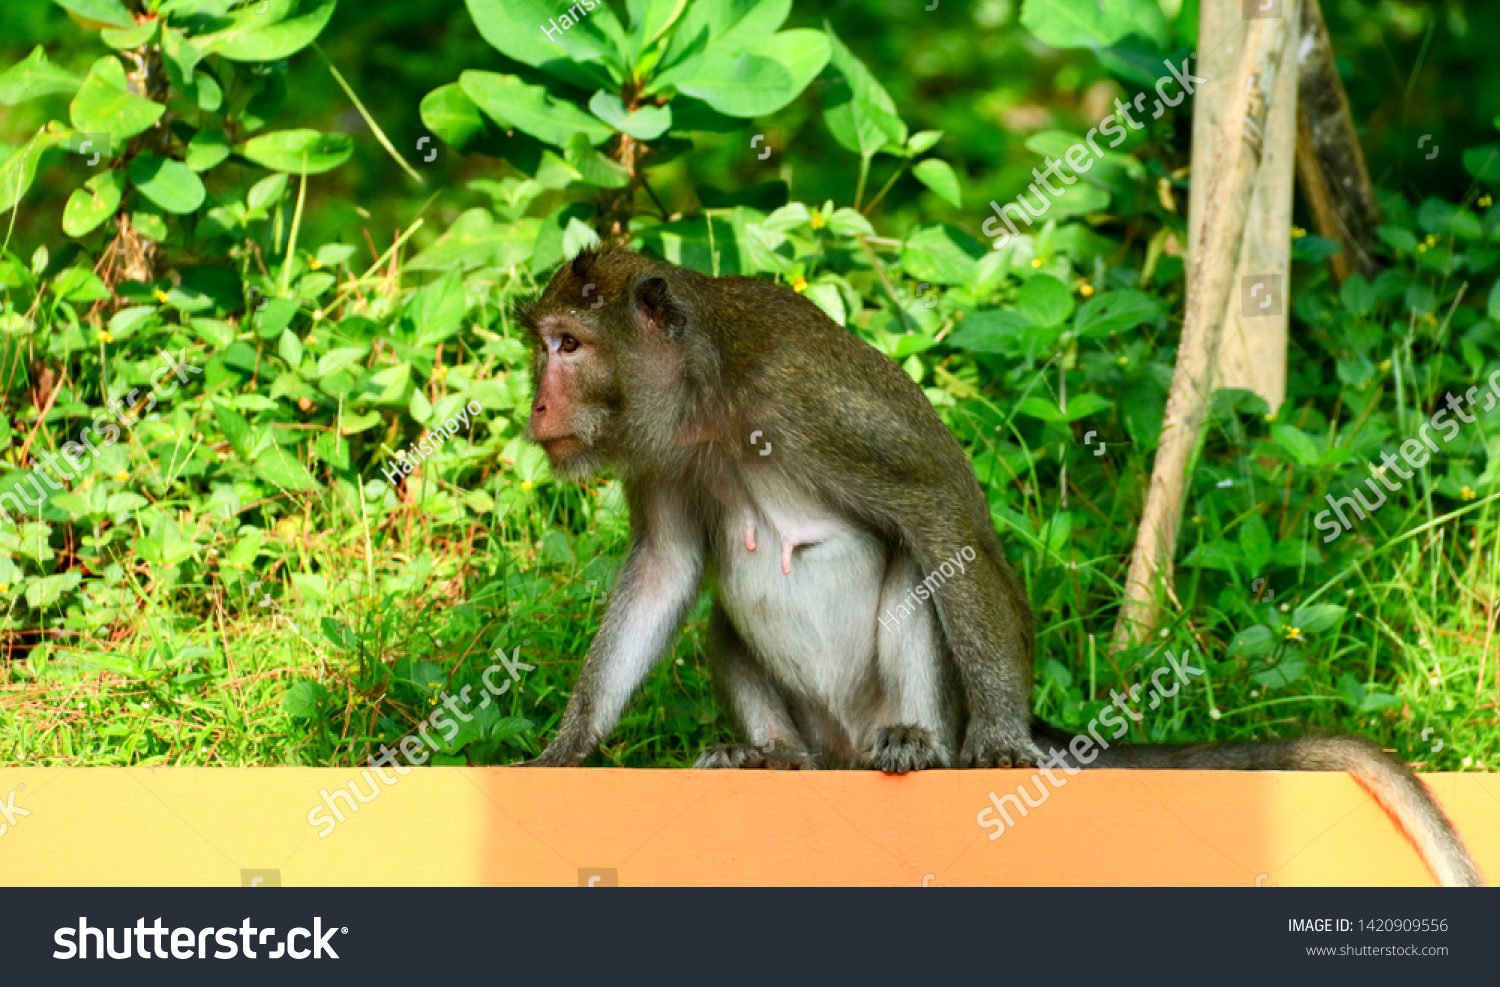 Cynomolgus monkey or Crab-eating macaque at teh Tidar Hill in Magelang City, Central Java, Indonesia. #1420909556